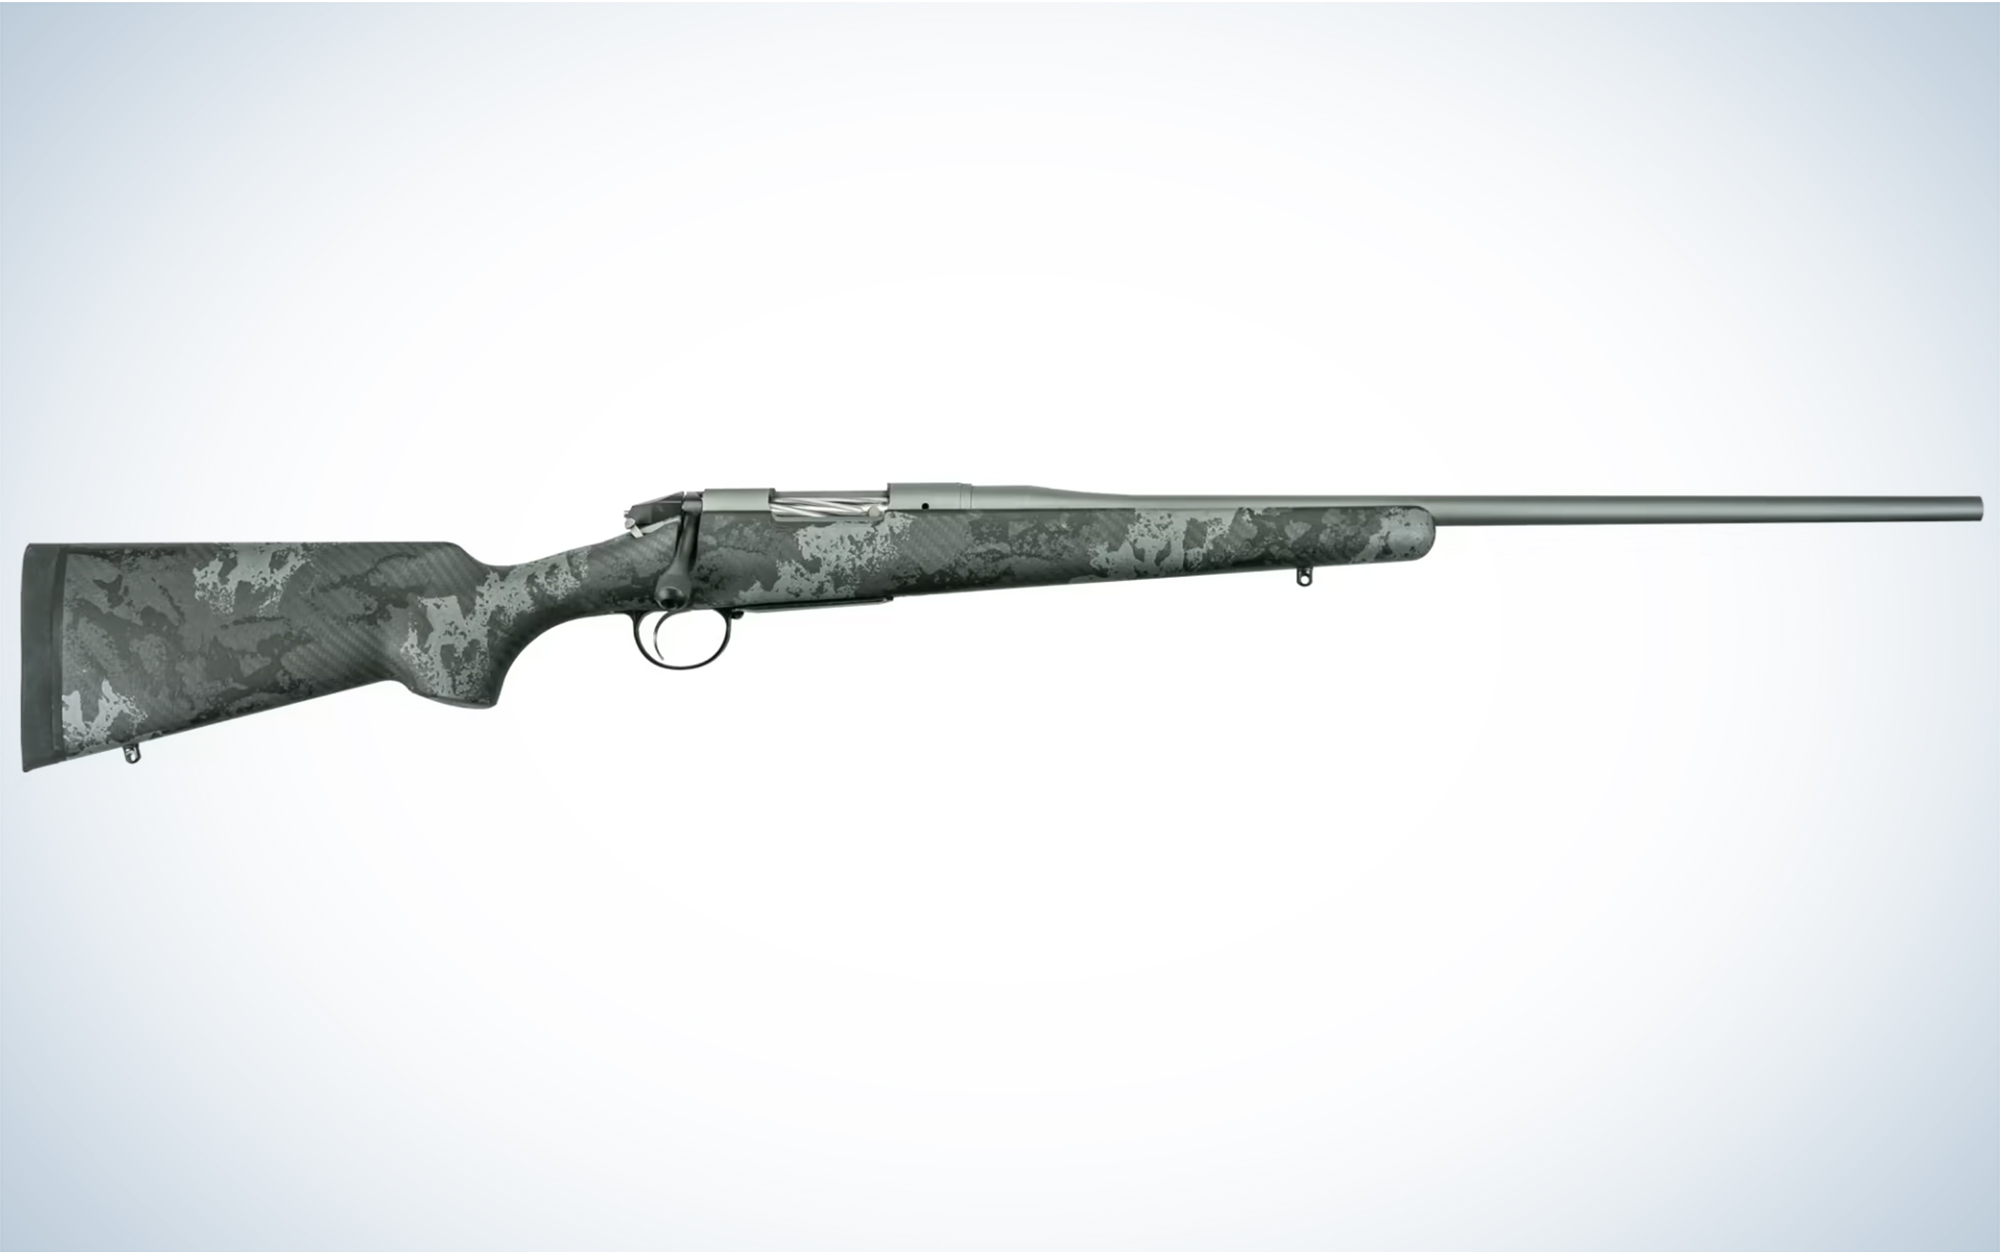 The Bergara Premier Mountain 2.0 is one of the best rifles for mountain hunting.